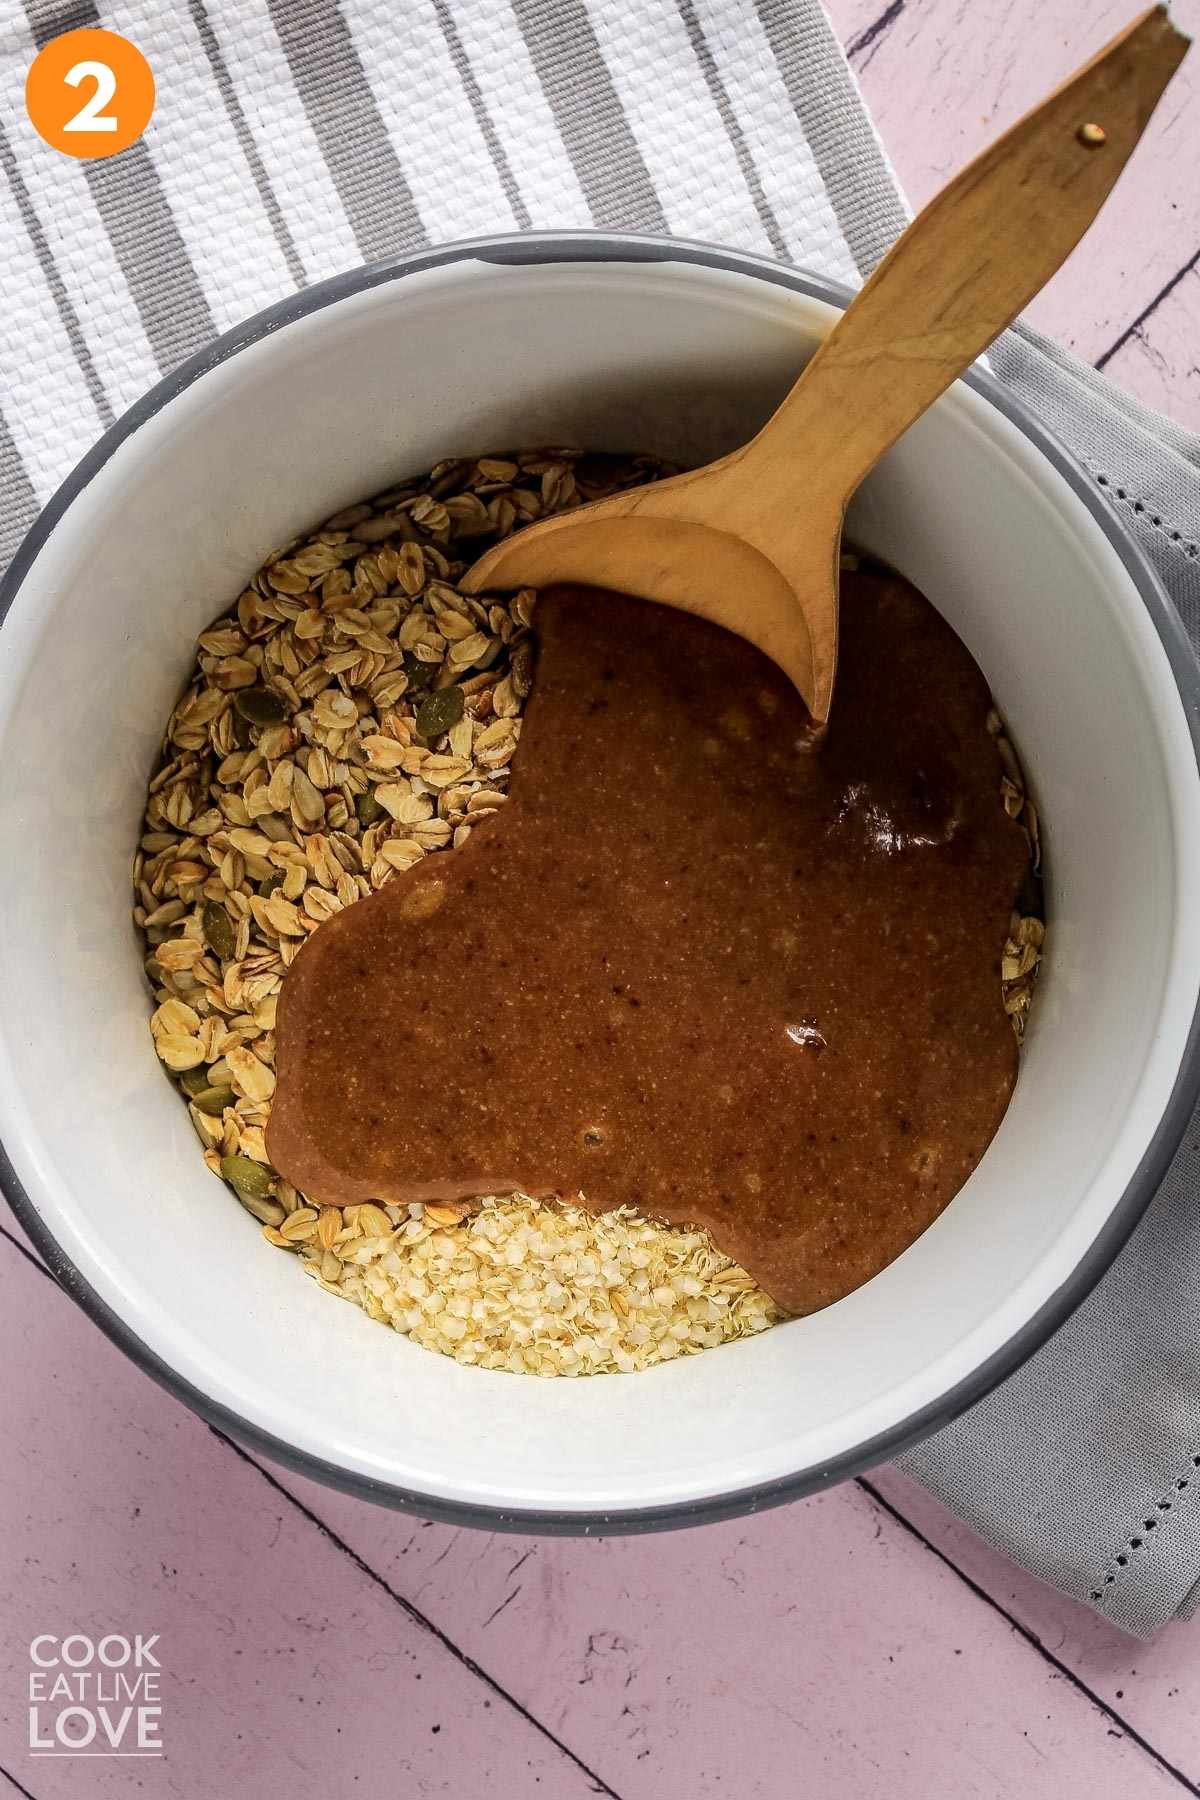 Oats and syrup in a white bowl with wooden spoon.